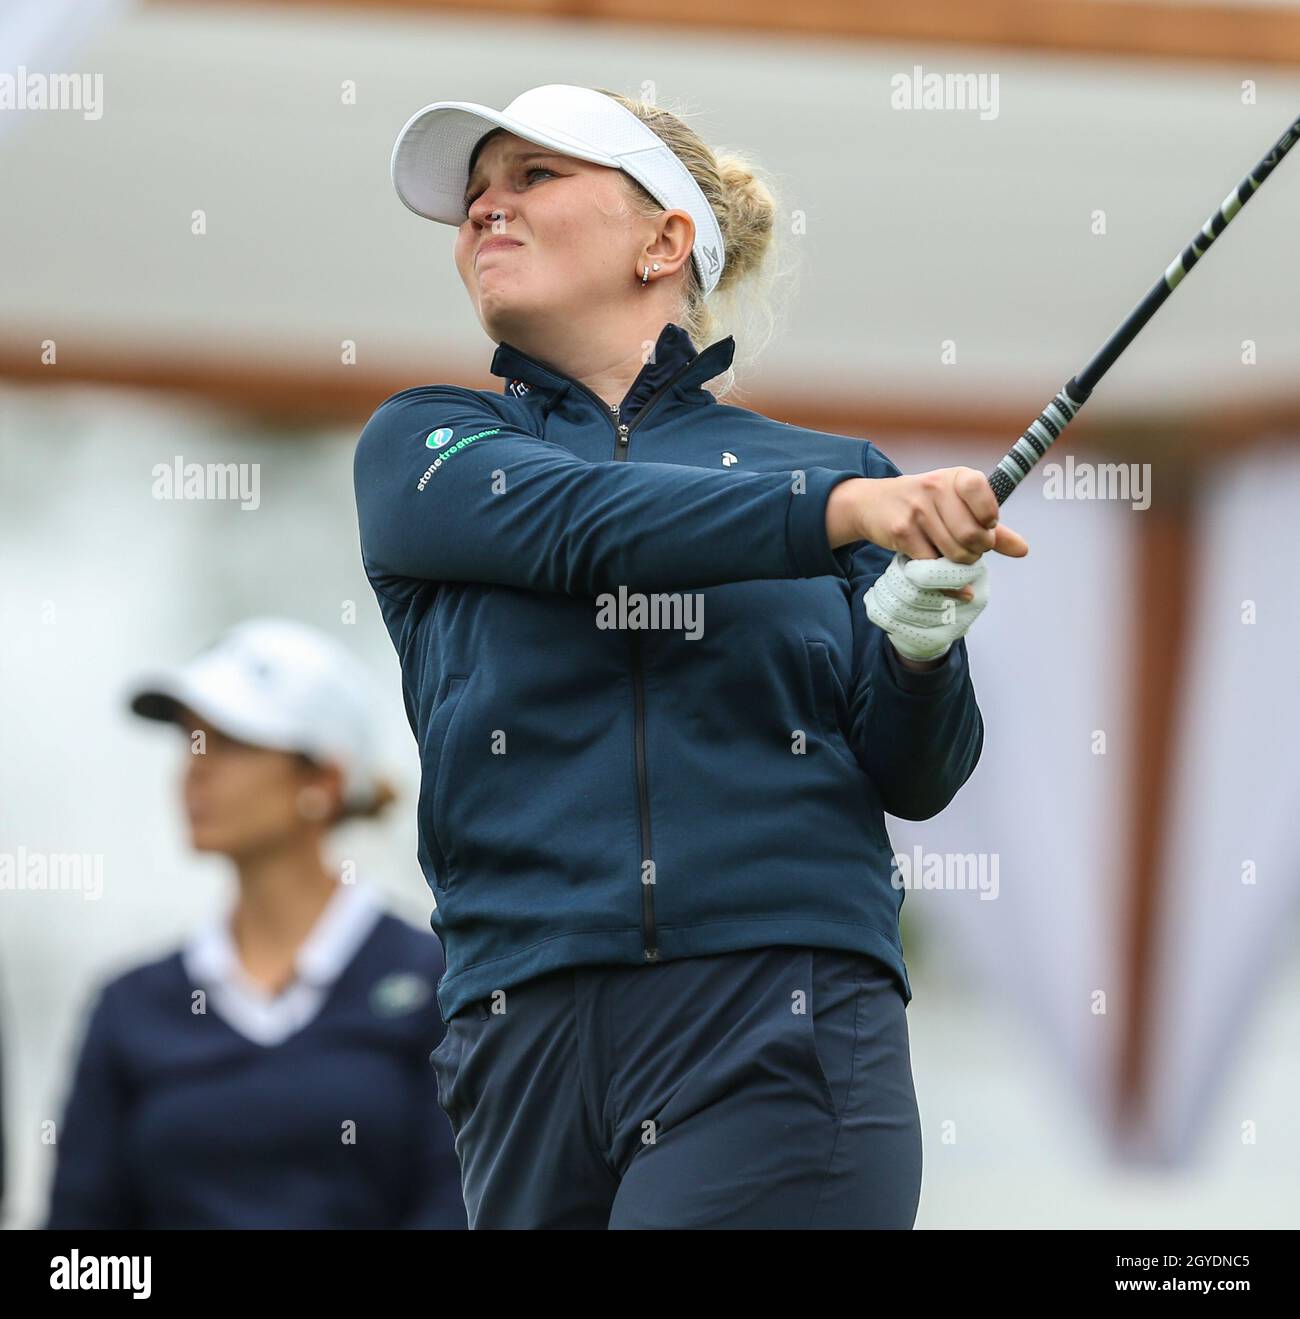 West Caldwell, NJ, USA. 7th Oct, 2021. Nanna Koerstz Madsen of Denmark tees off during the first round of the LPGA Cognizant Founders Cup at the Mountain Ridge Golf Course in West Caldwell, NJ. Mike Langish/Cal Sport Media. Credit: csm/Alamy Live News Stock Photo